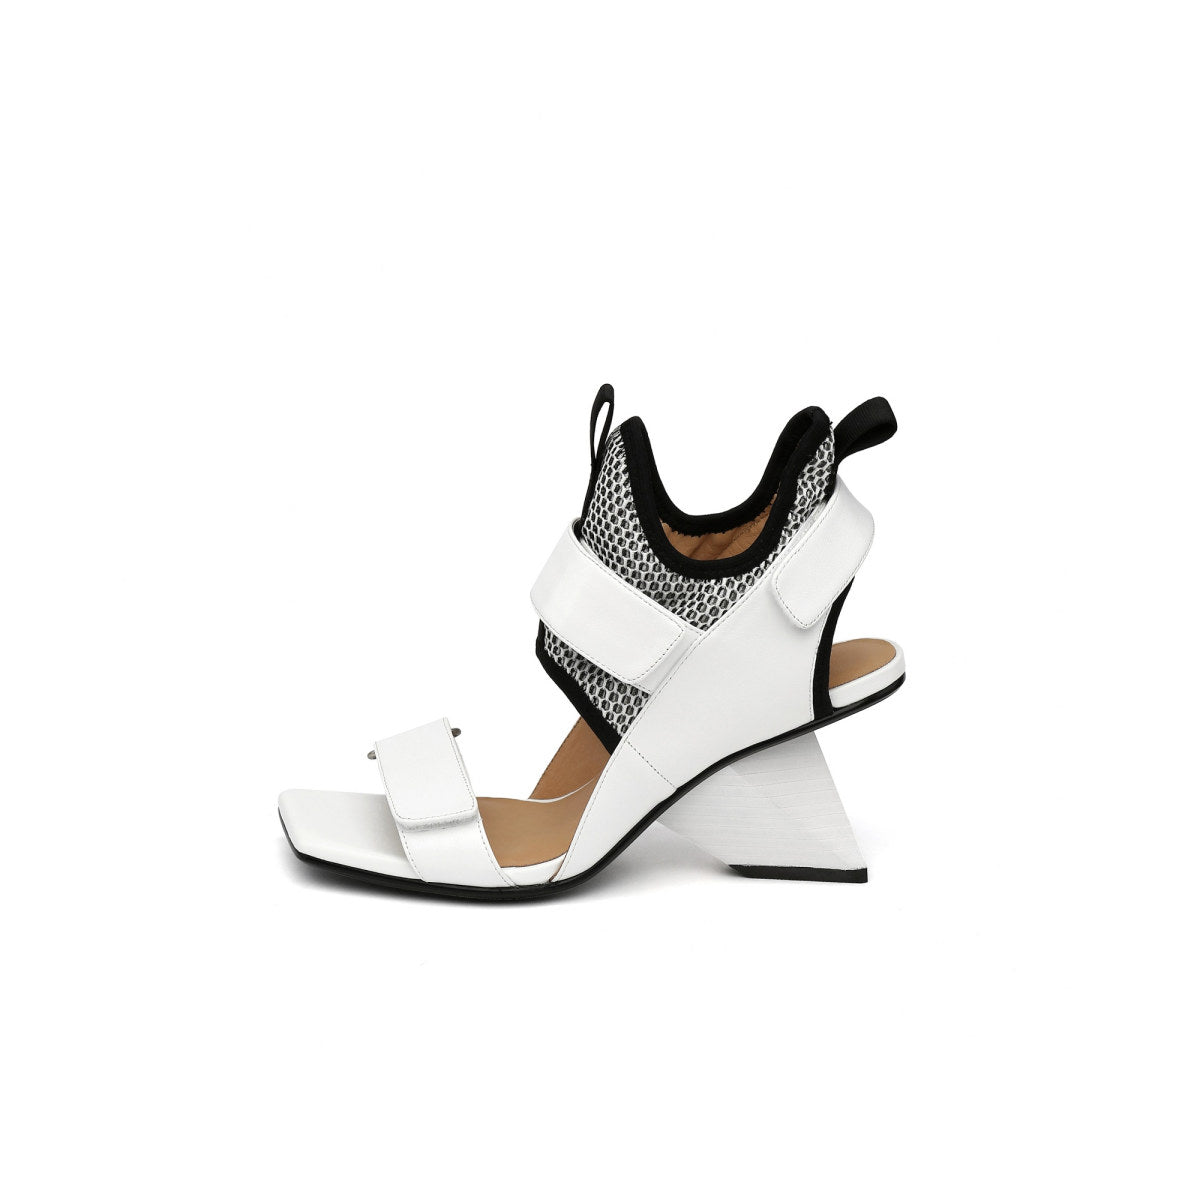 Impossible Heels Sporty Mesh Fusion White Sandals